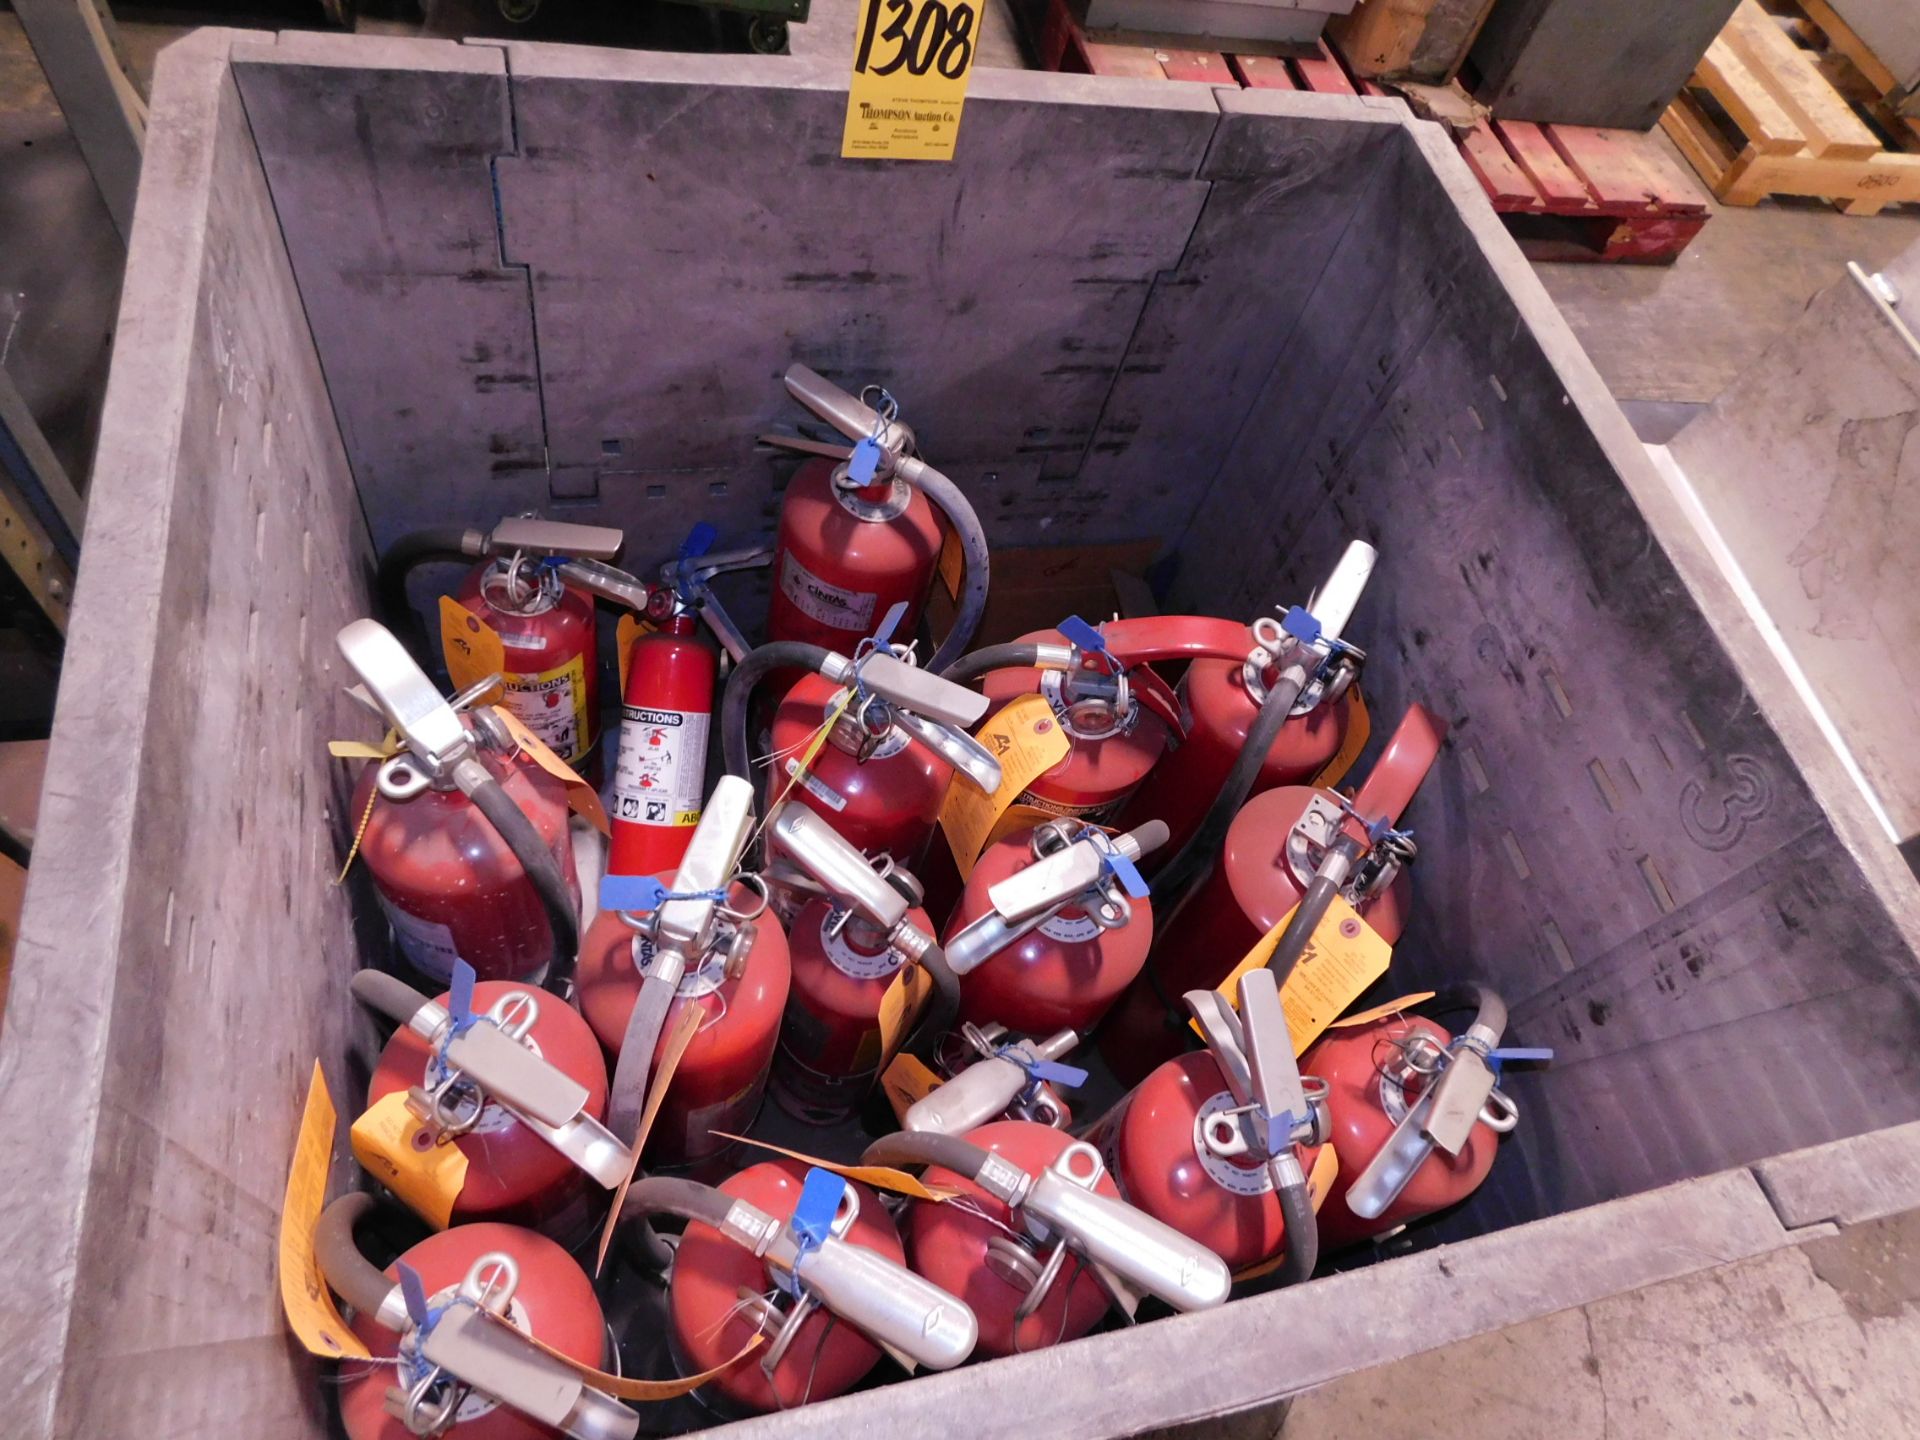 Plastic Crate of Fire Extinguishers